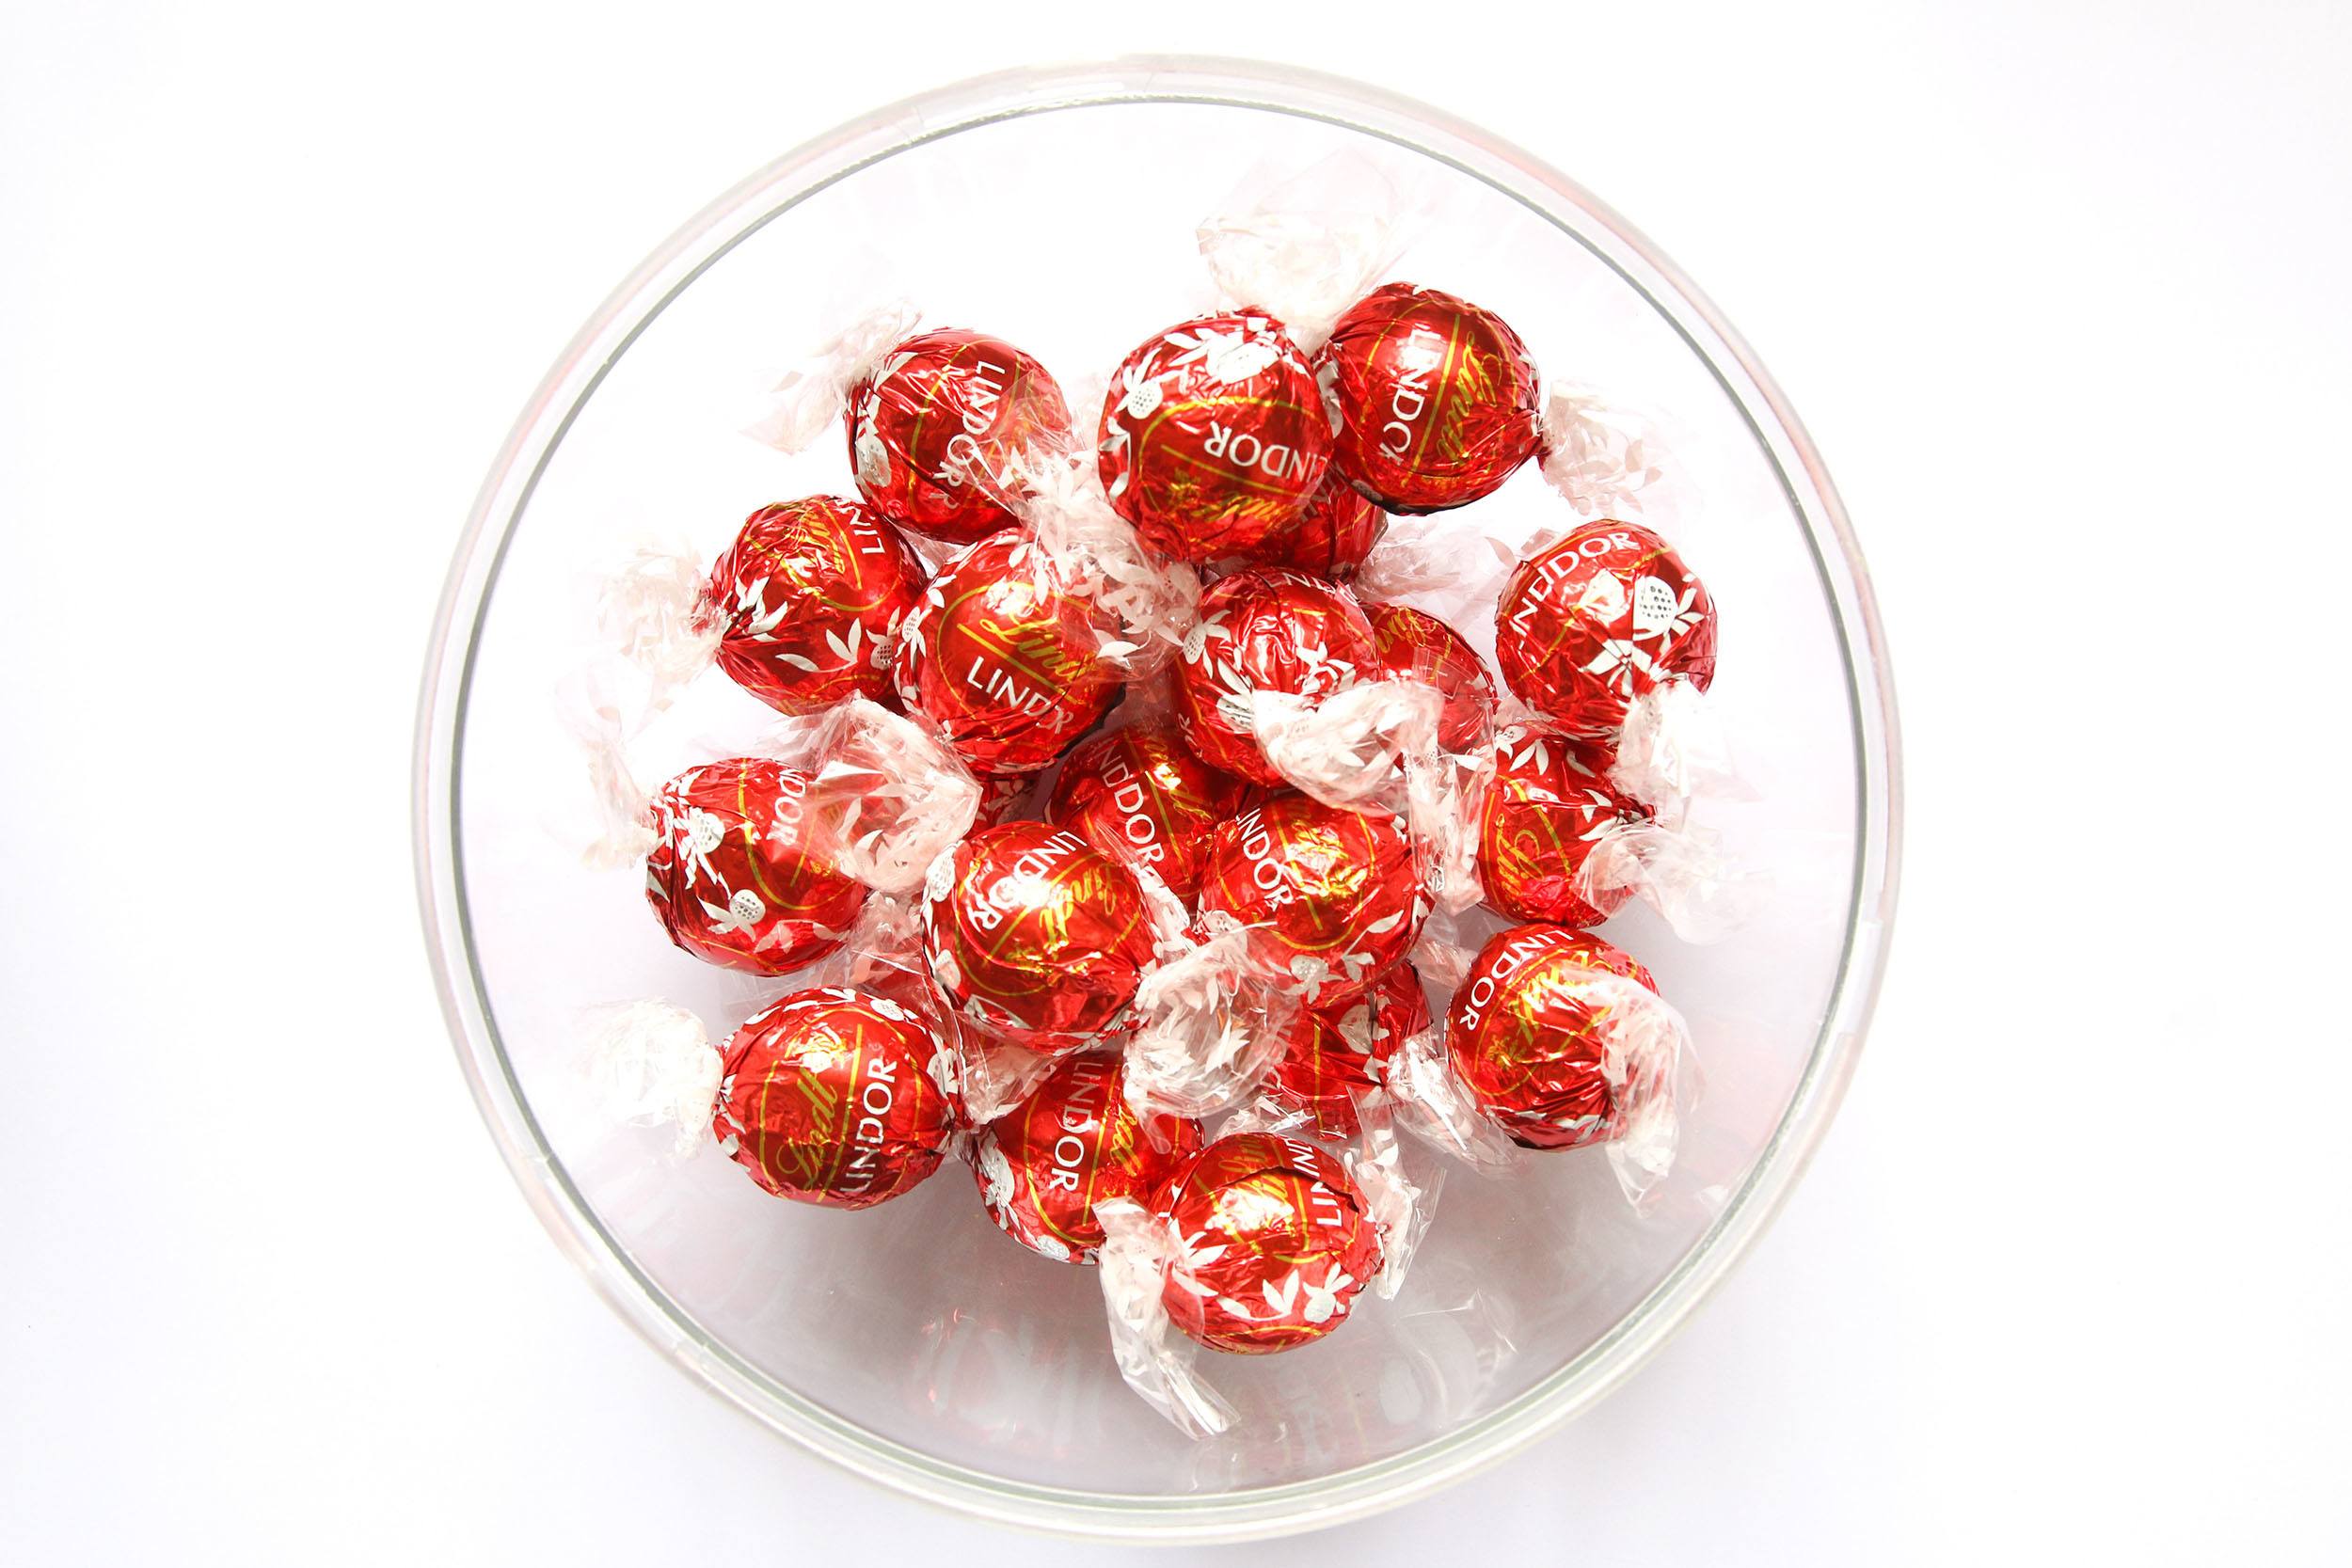 Lindt Swiss chocolates in a glass bowl on a bench